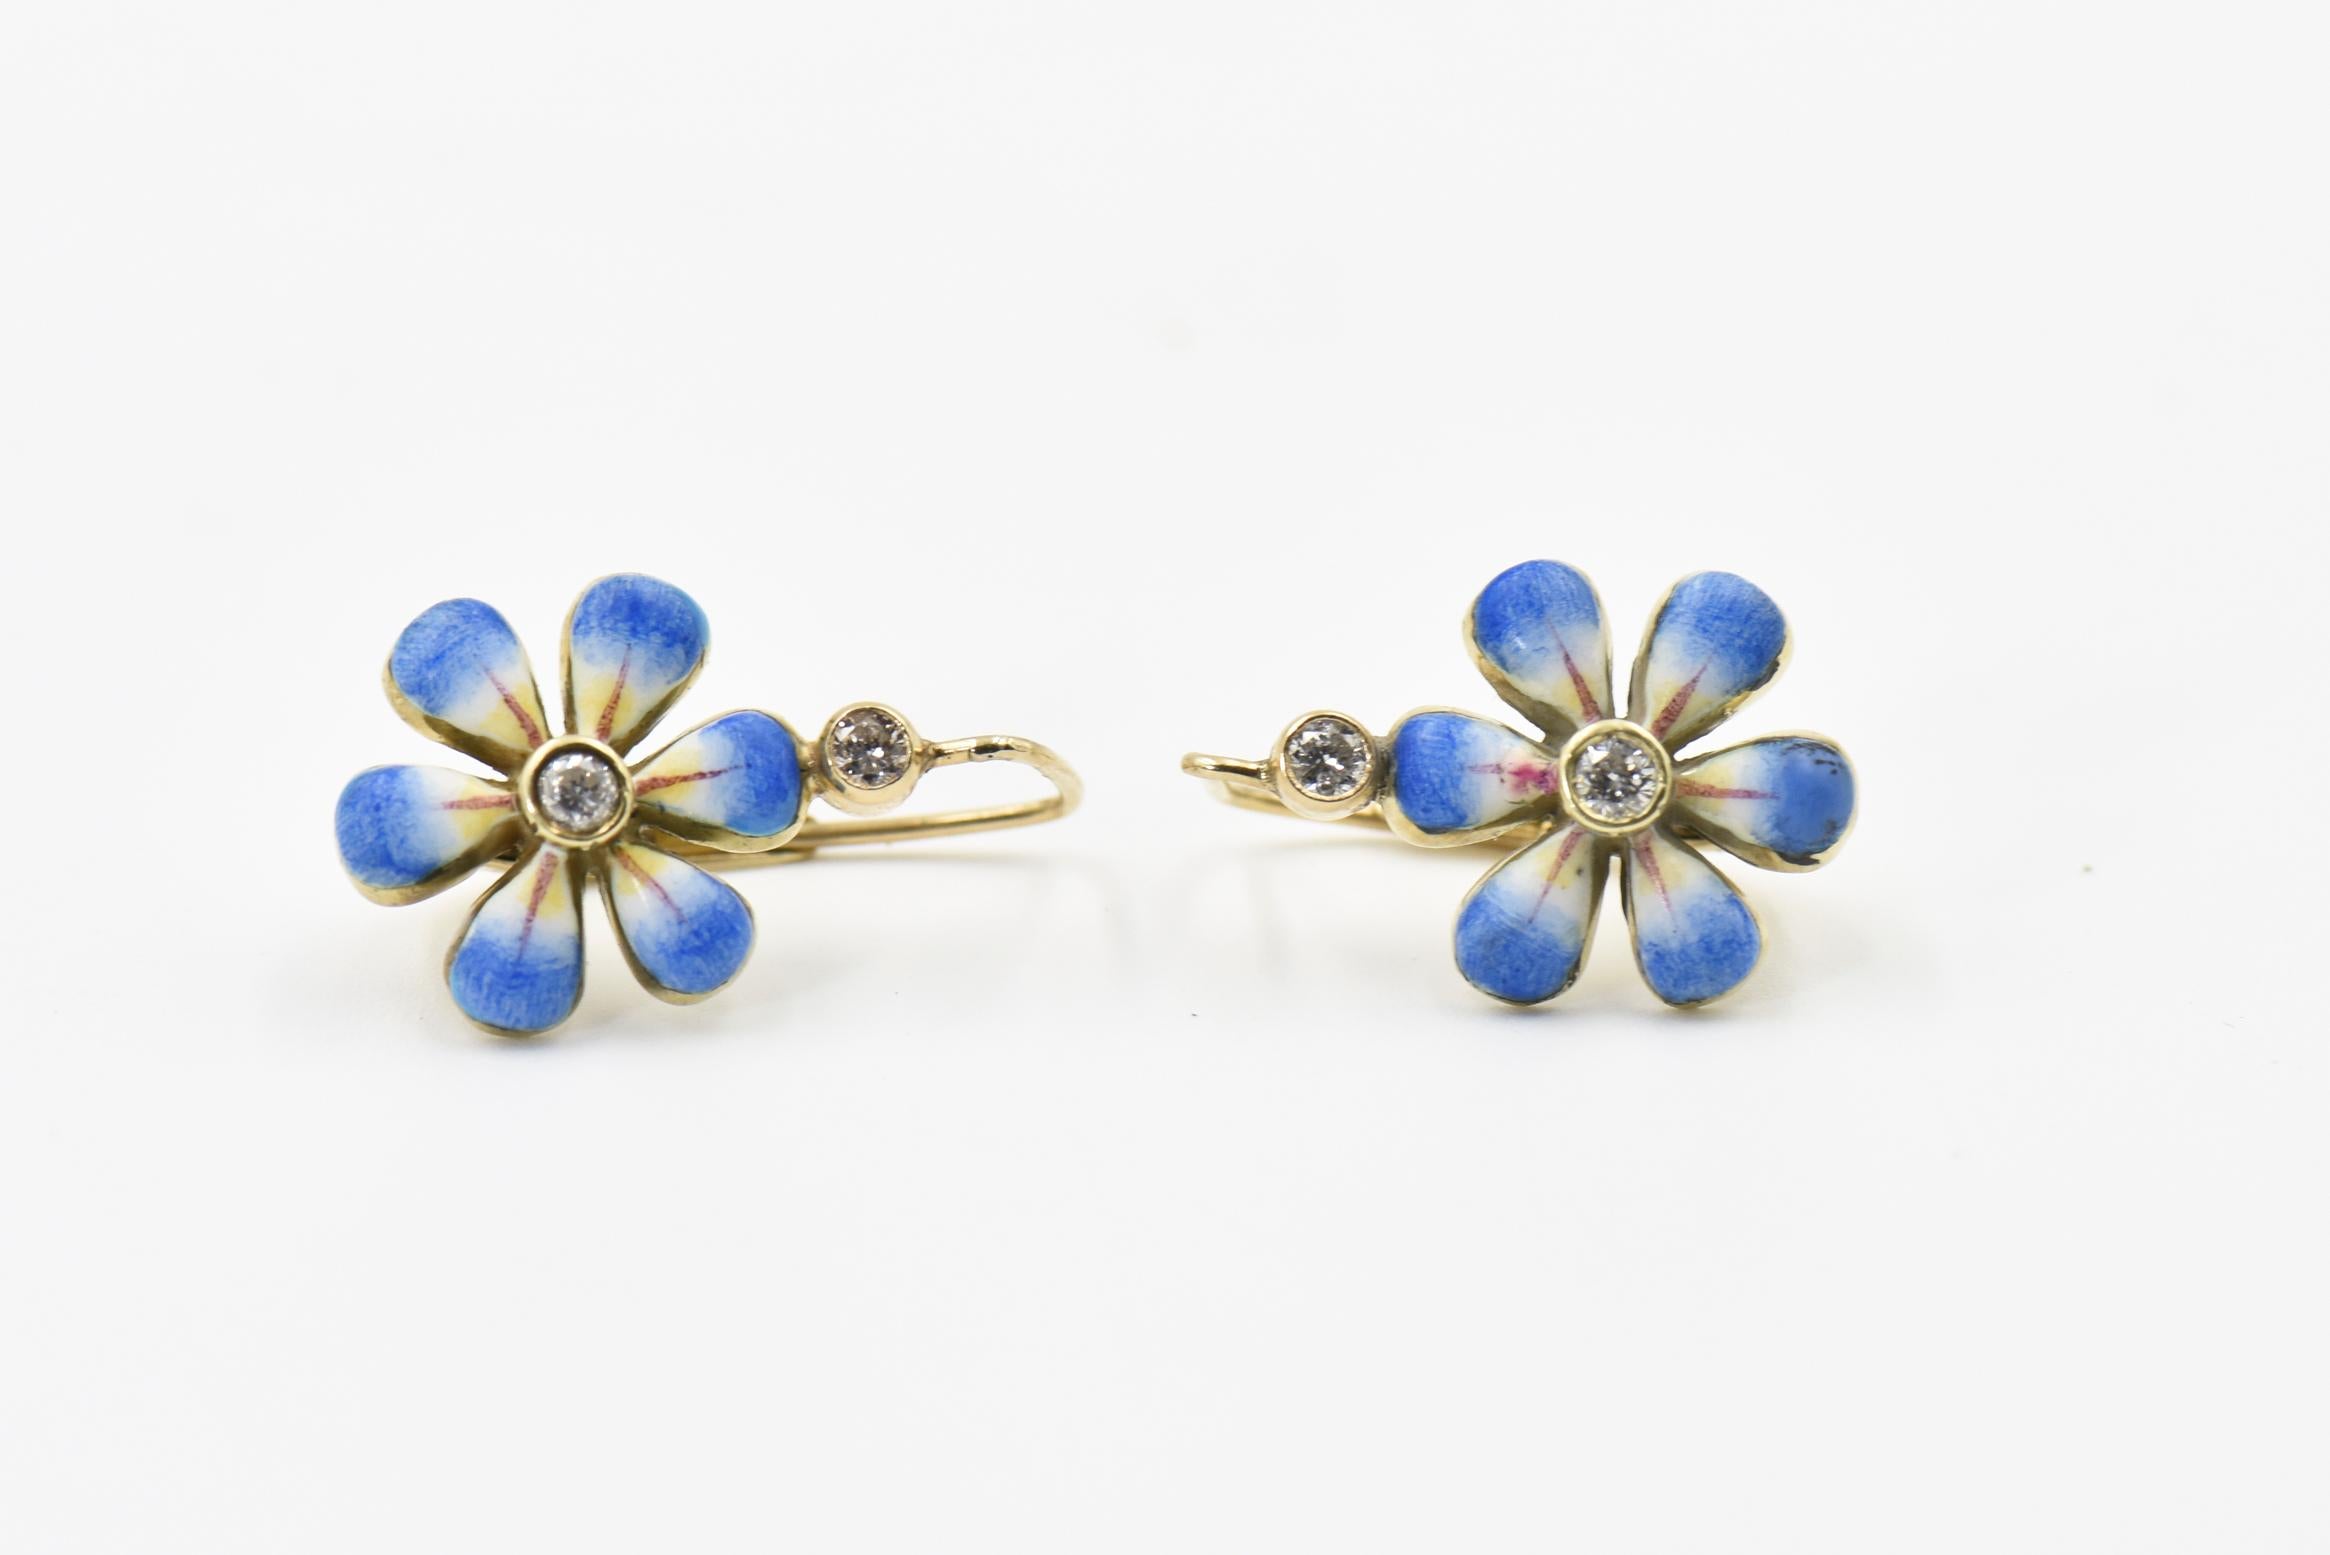 This pair of blue enamel daisy earrings are part of the daisy line, a beautiful handmade line of jewelry by Sandra J. Sensations. At the top of the earrings is a small diamond that is attached to a blue enamel dangling flower.  Each flower is hand